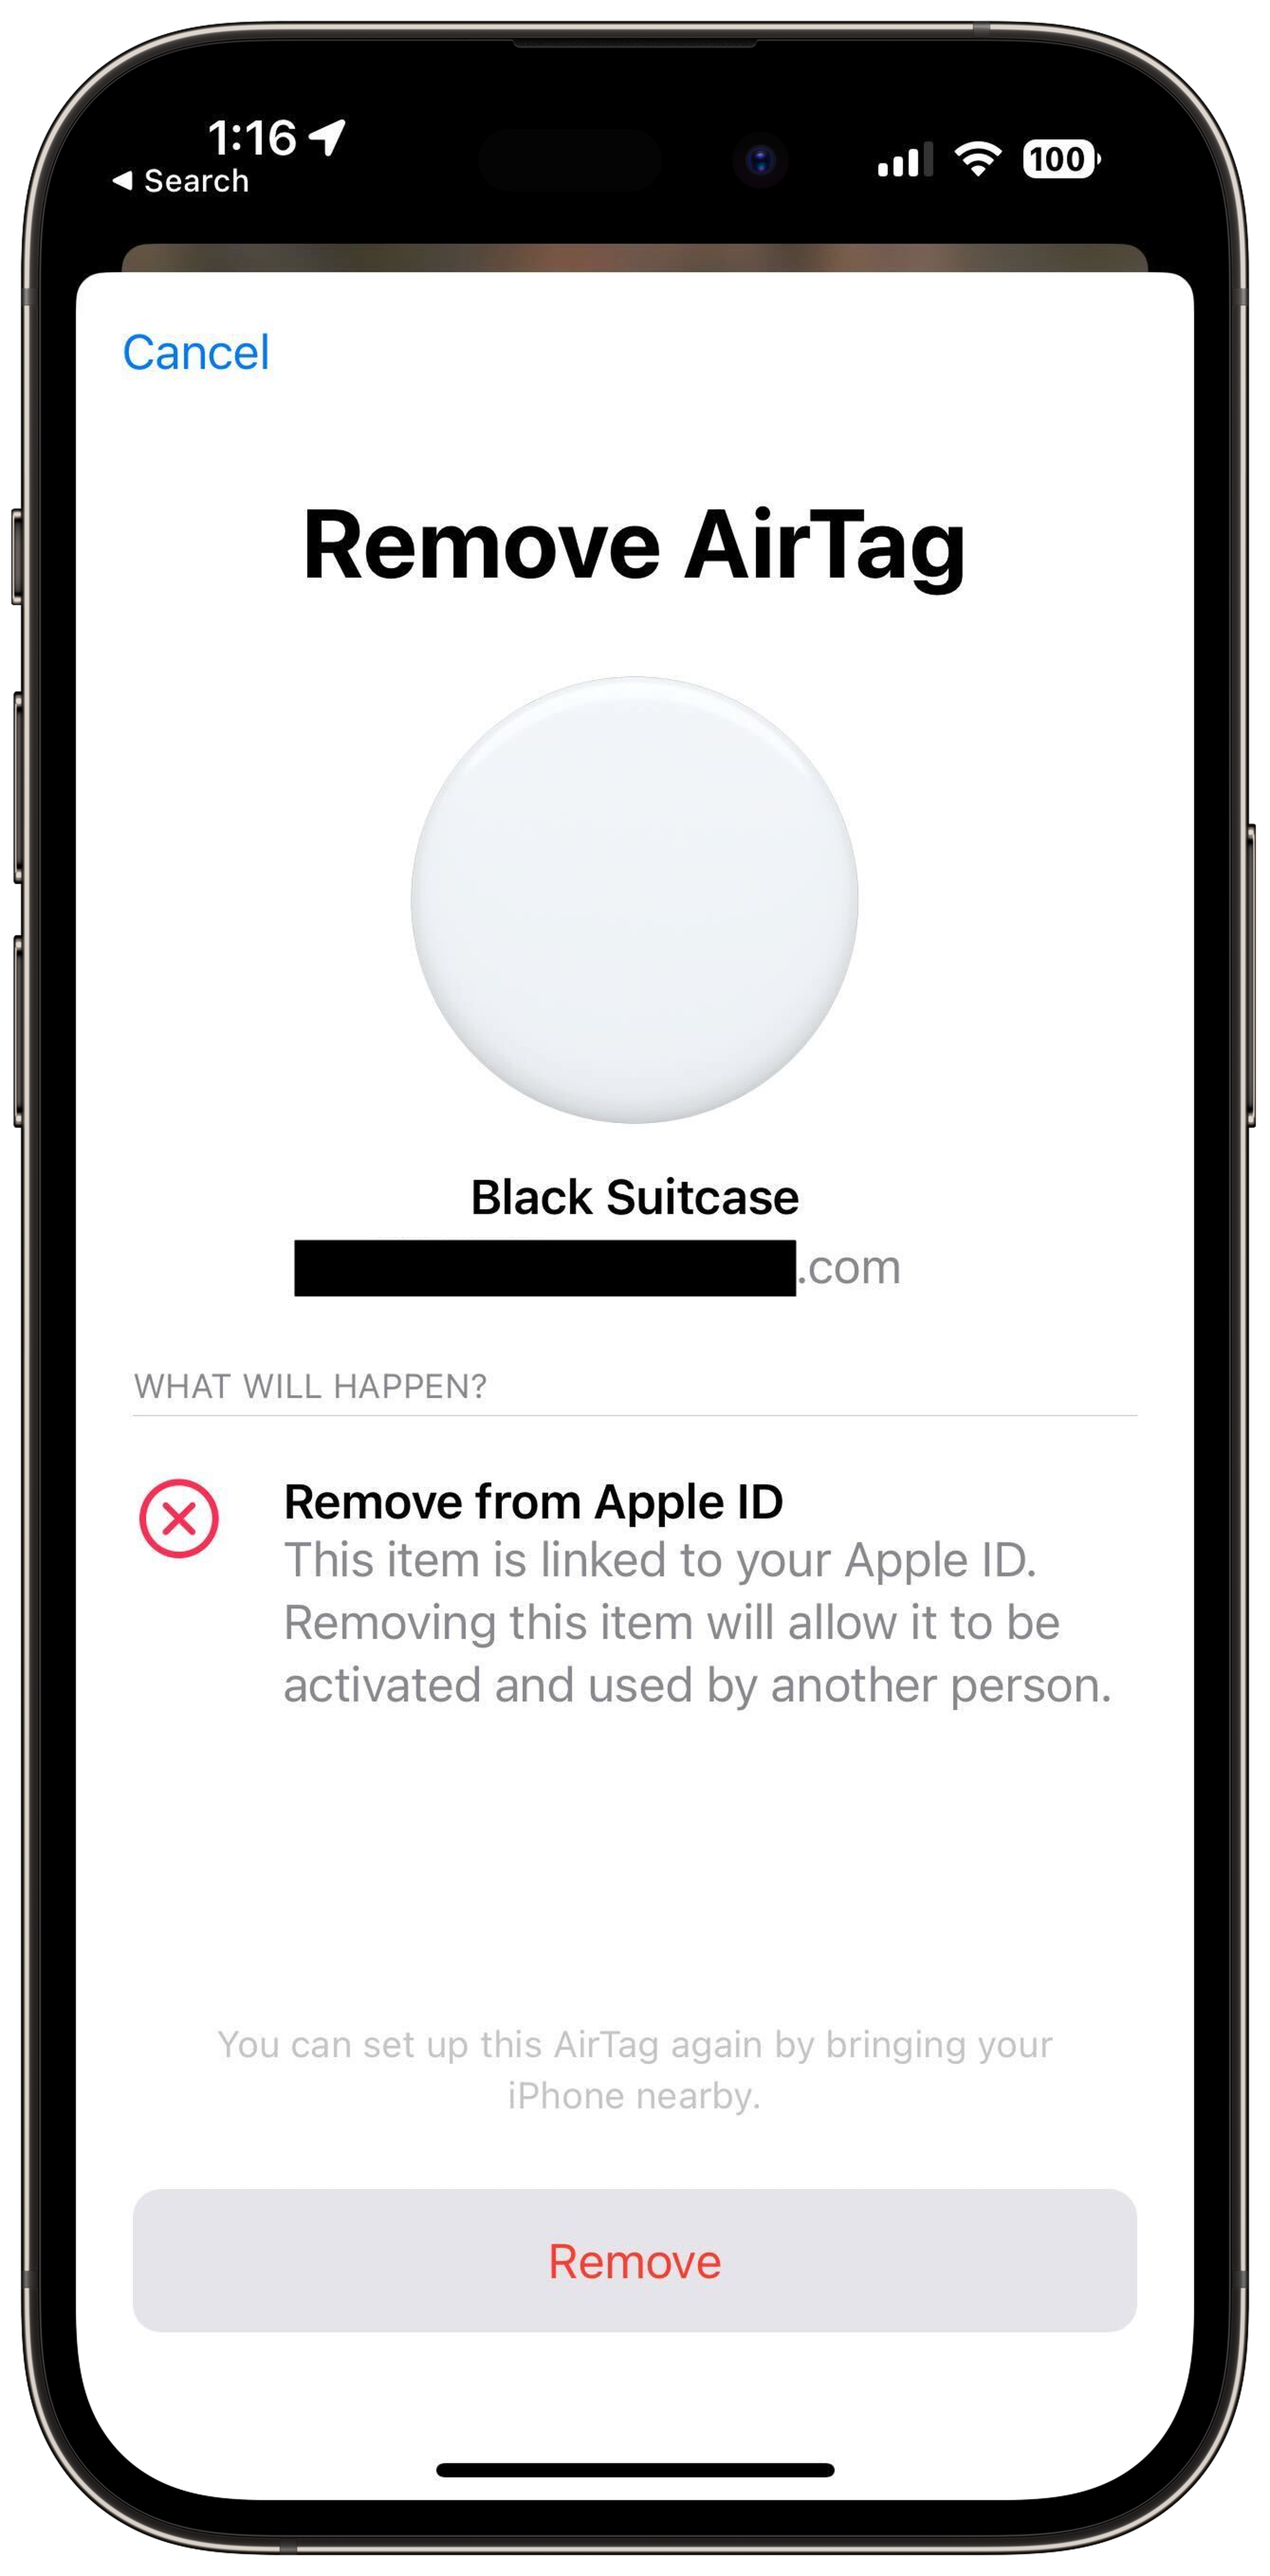 Screenshot of Apple’s “Remove AirTag” interface.